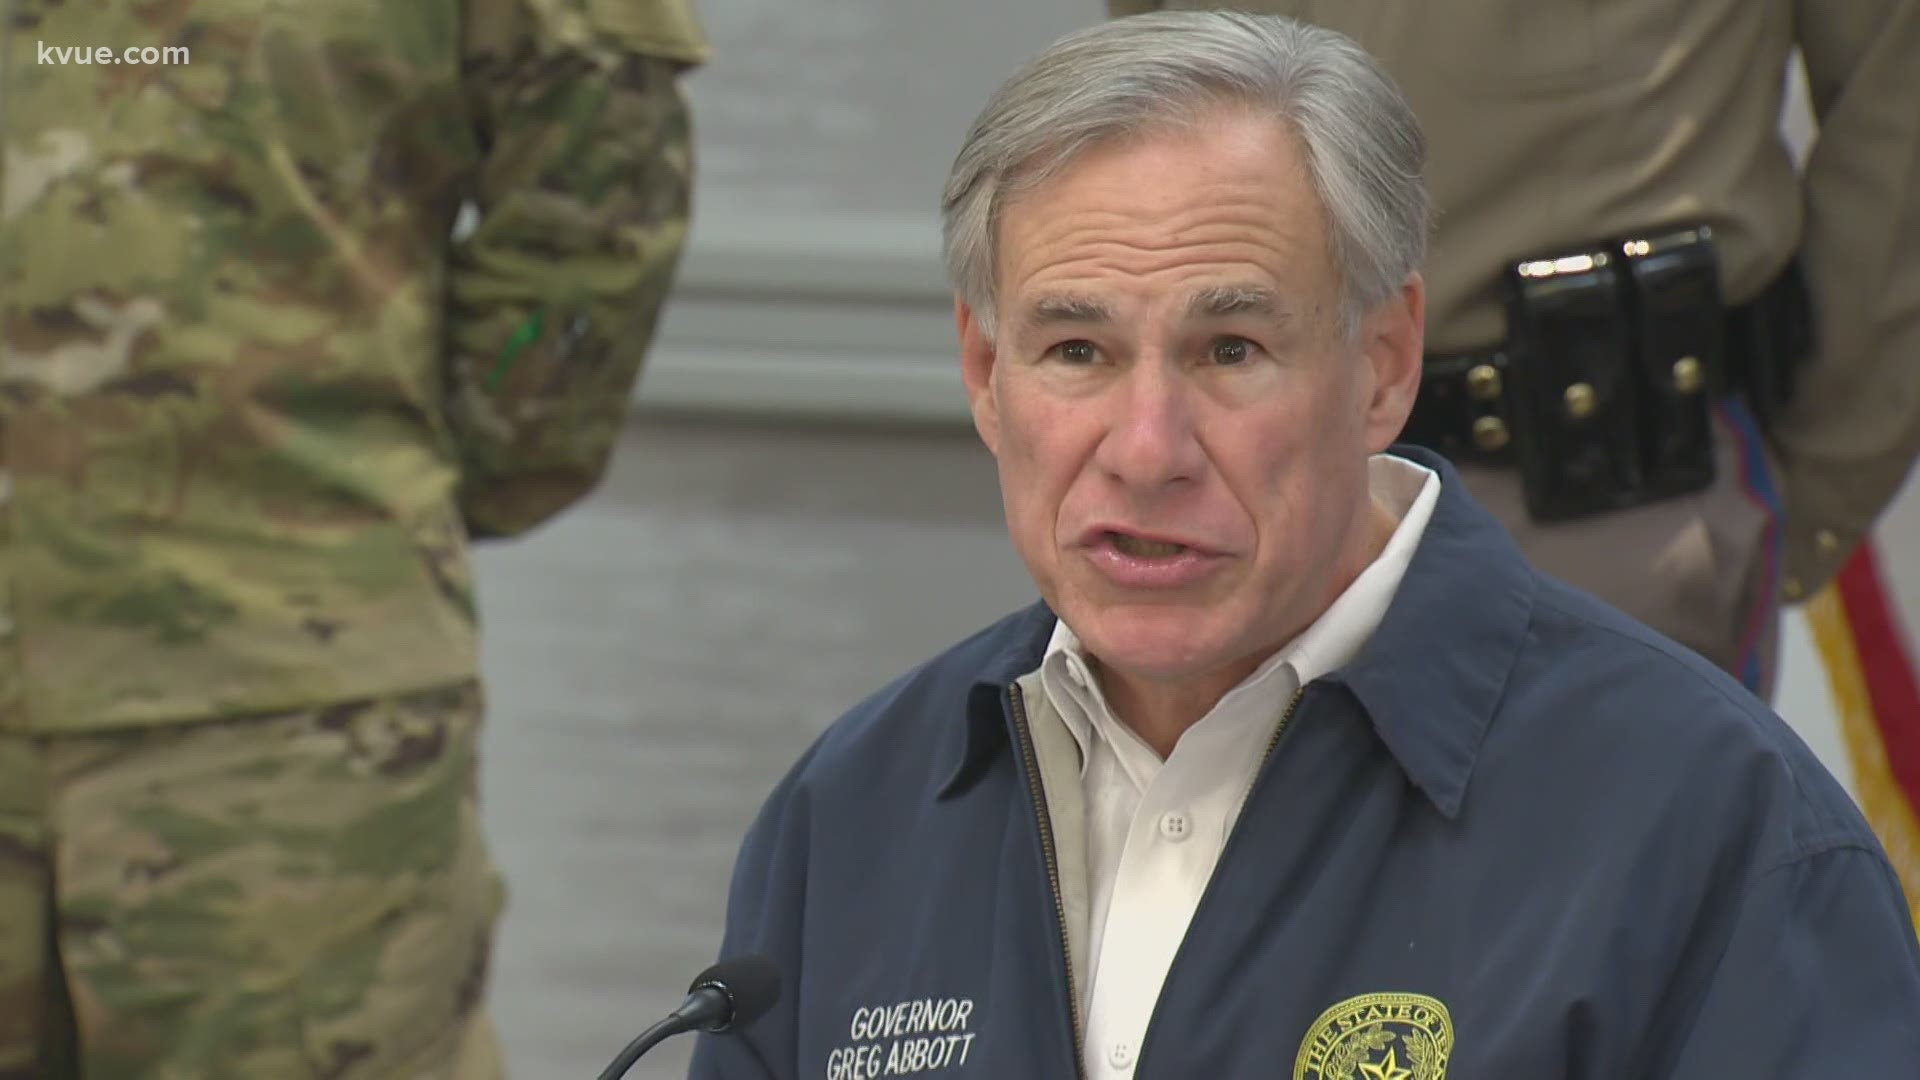 Gov. Greg Abbott is urging Texans to prepare for more dangerous winter weather. The top priority is keeping people off the roads if possible.